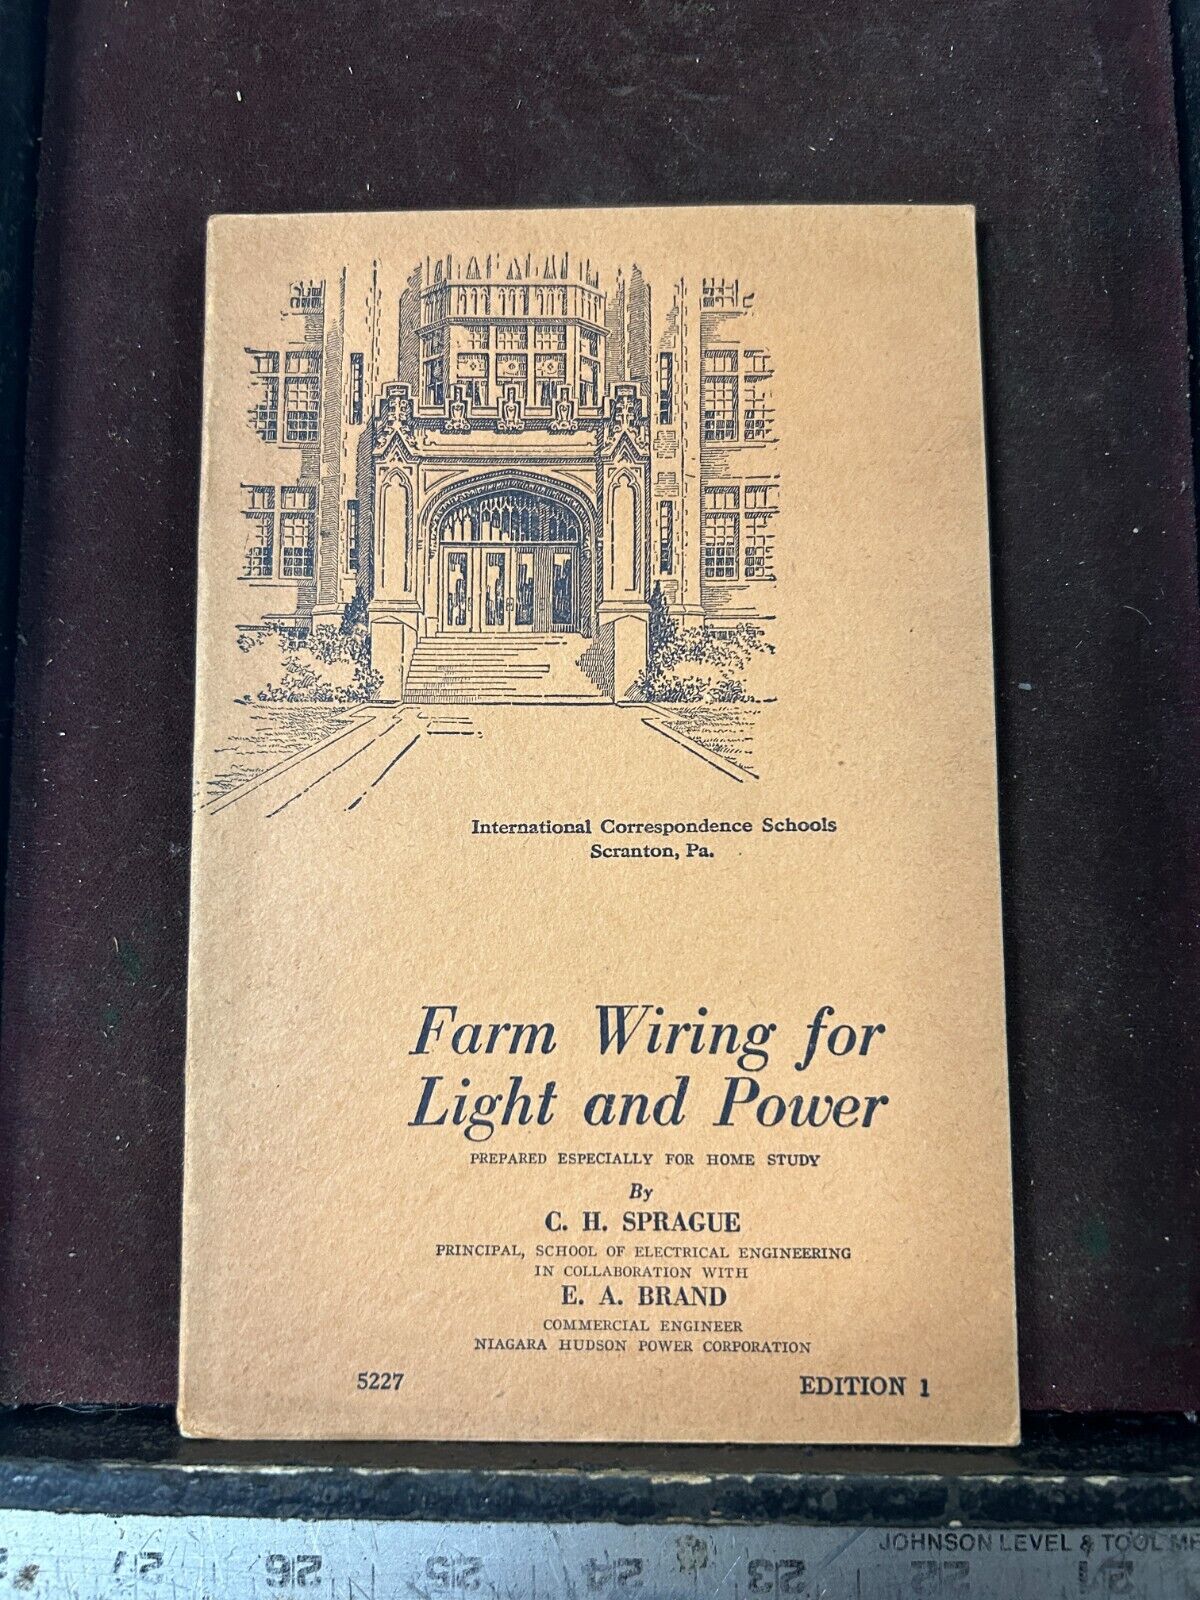 Electrical Work ICS Form Wiring for Light & Power  Work Booklet BlkFlCb